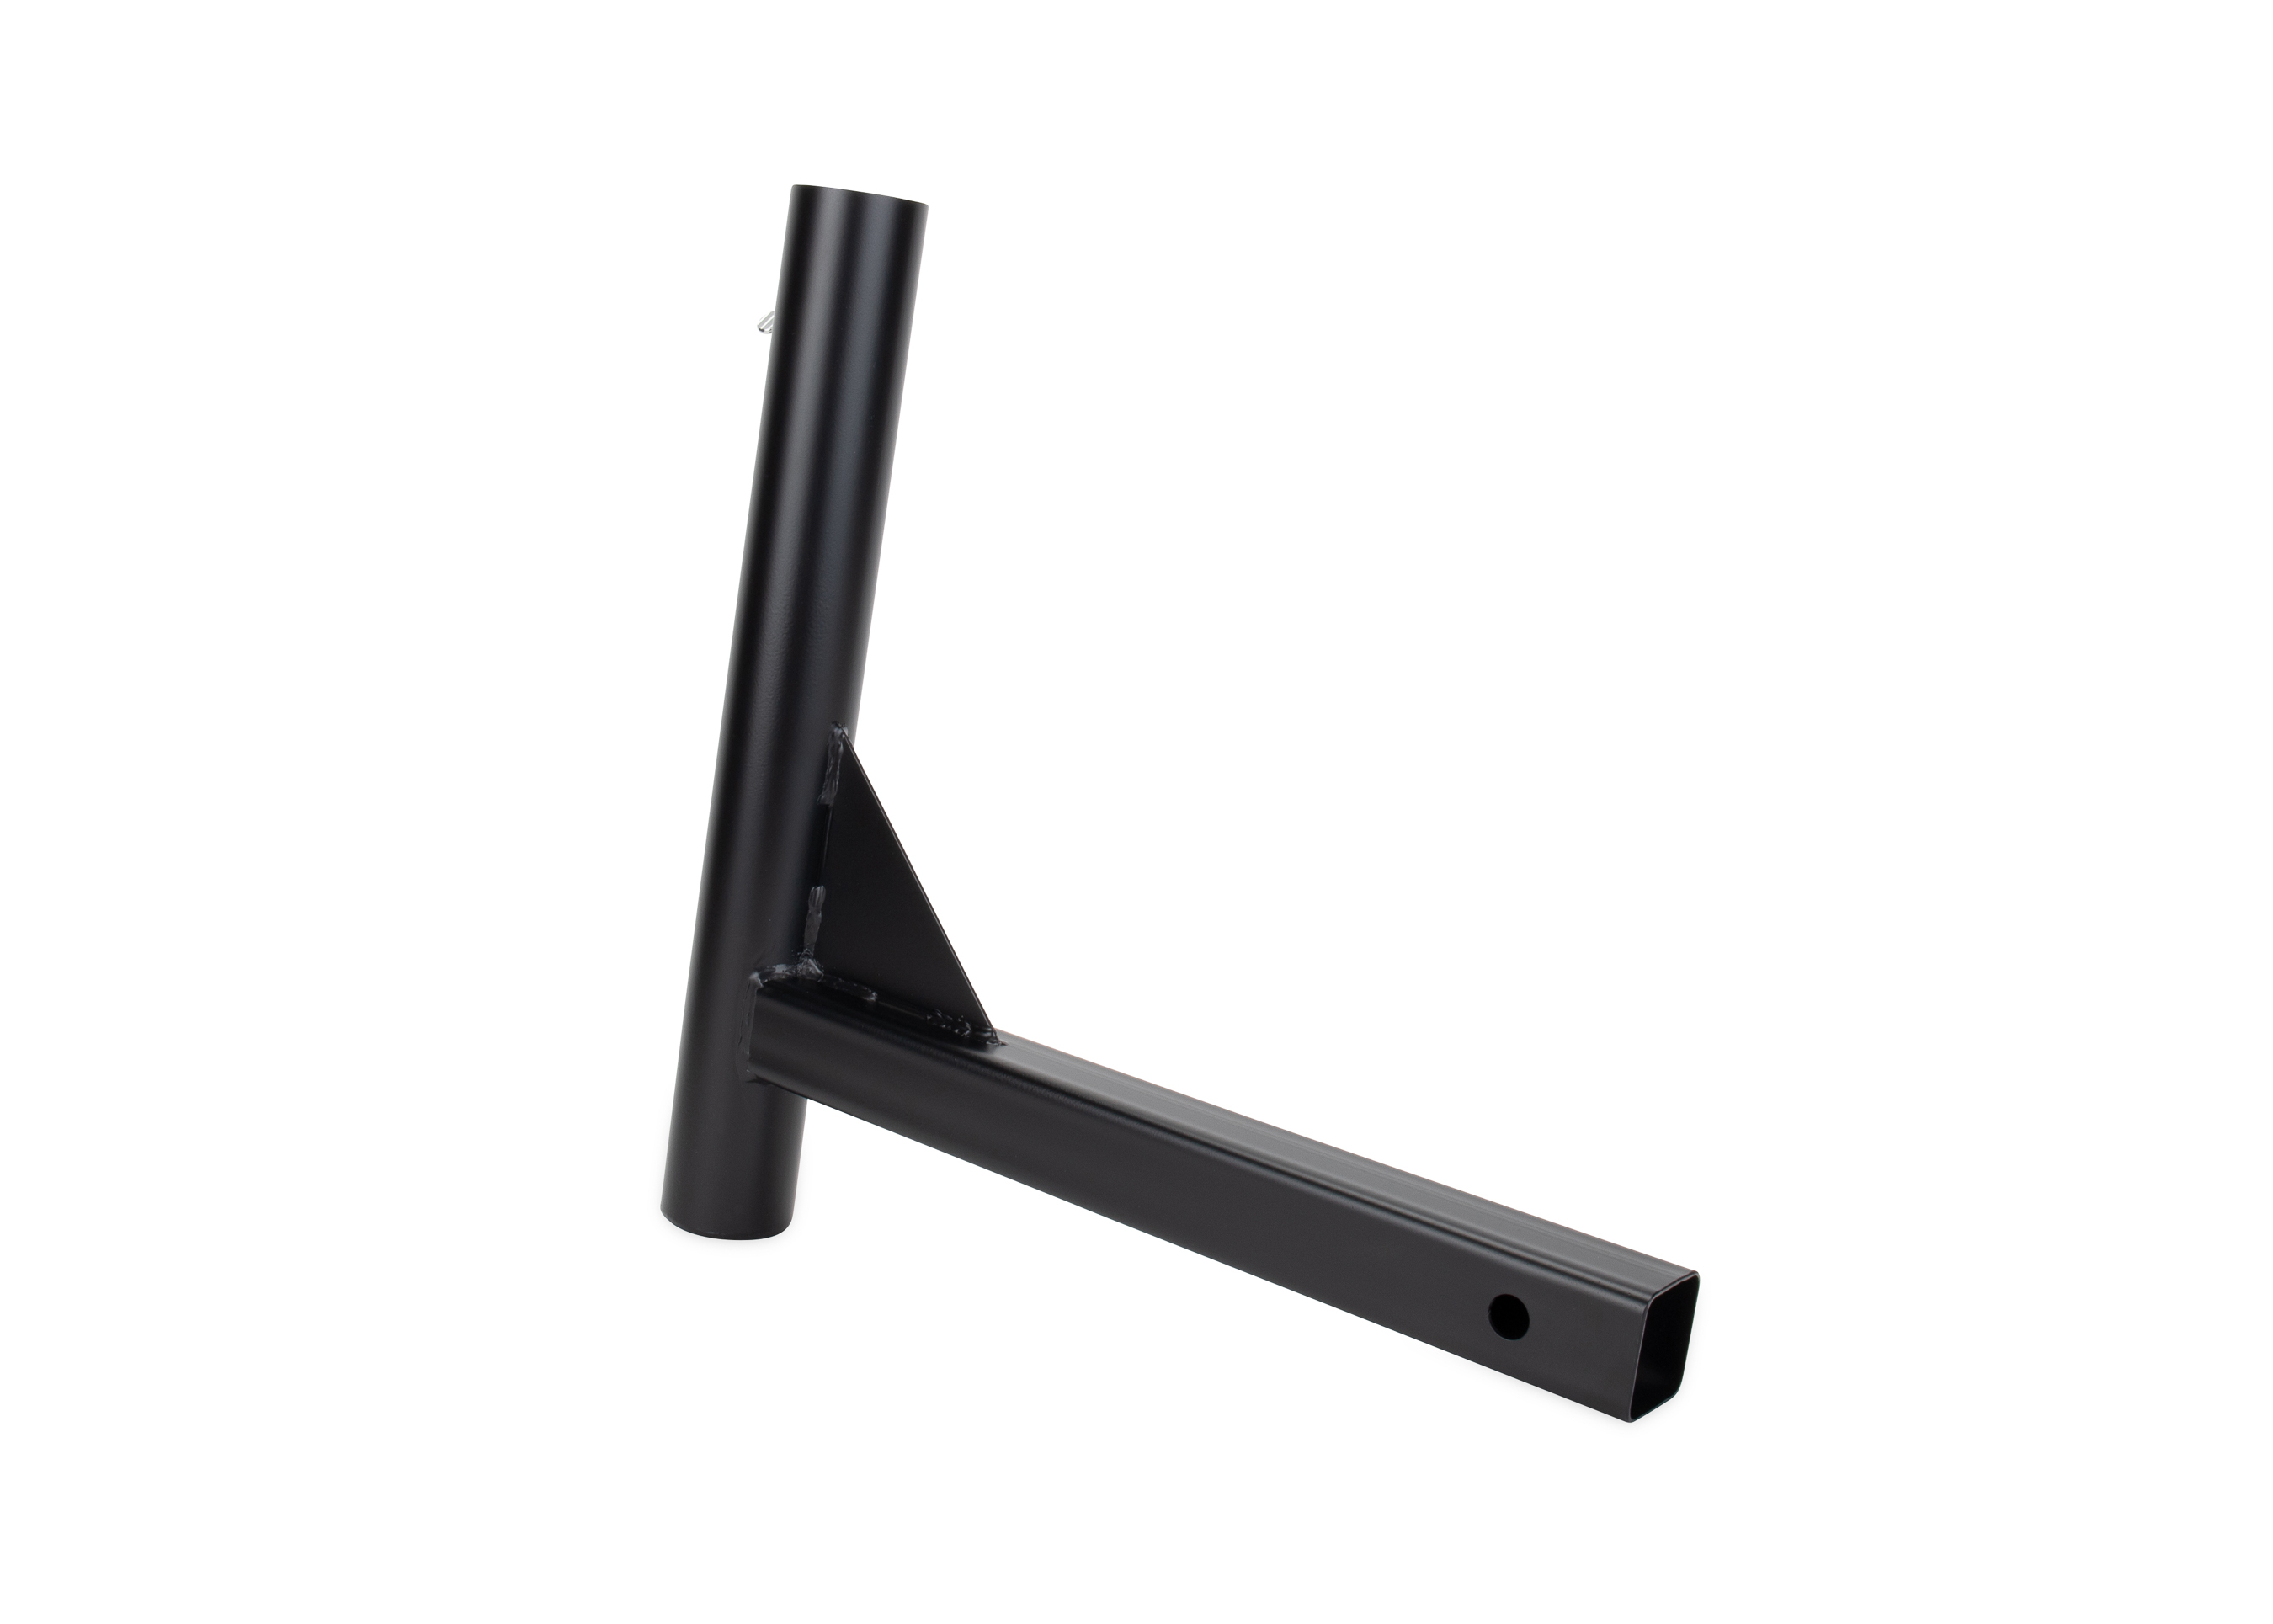 Camco Hitch Mount Flagpole Holder | Fits Standard 2-inch Hitch Receivers | Powder-Coated Finish, Black (51611) - image 1 of 6